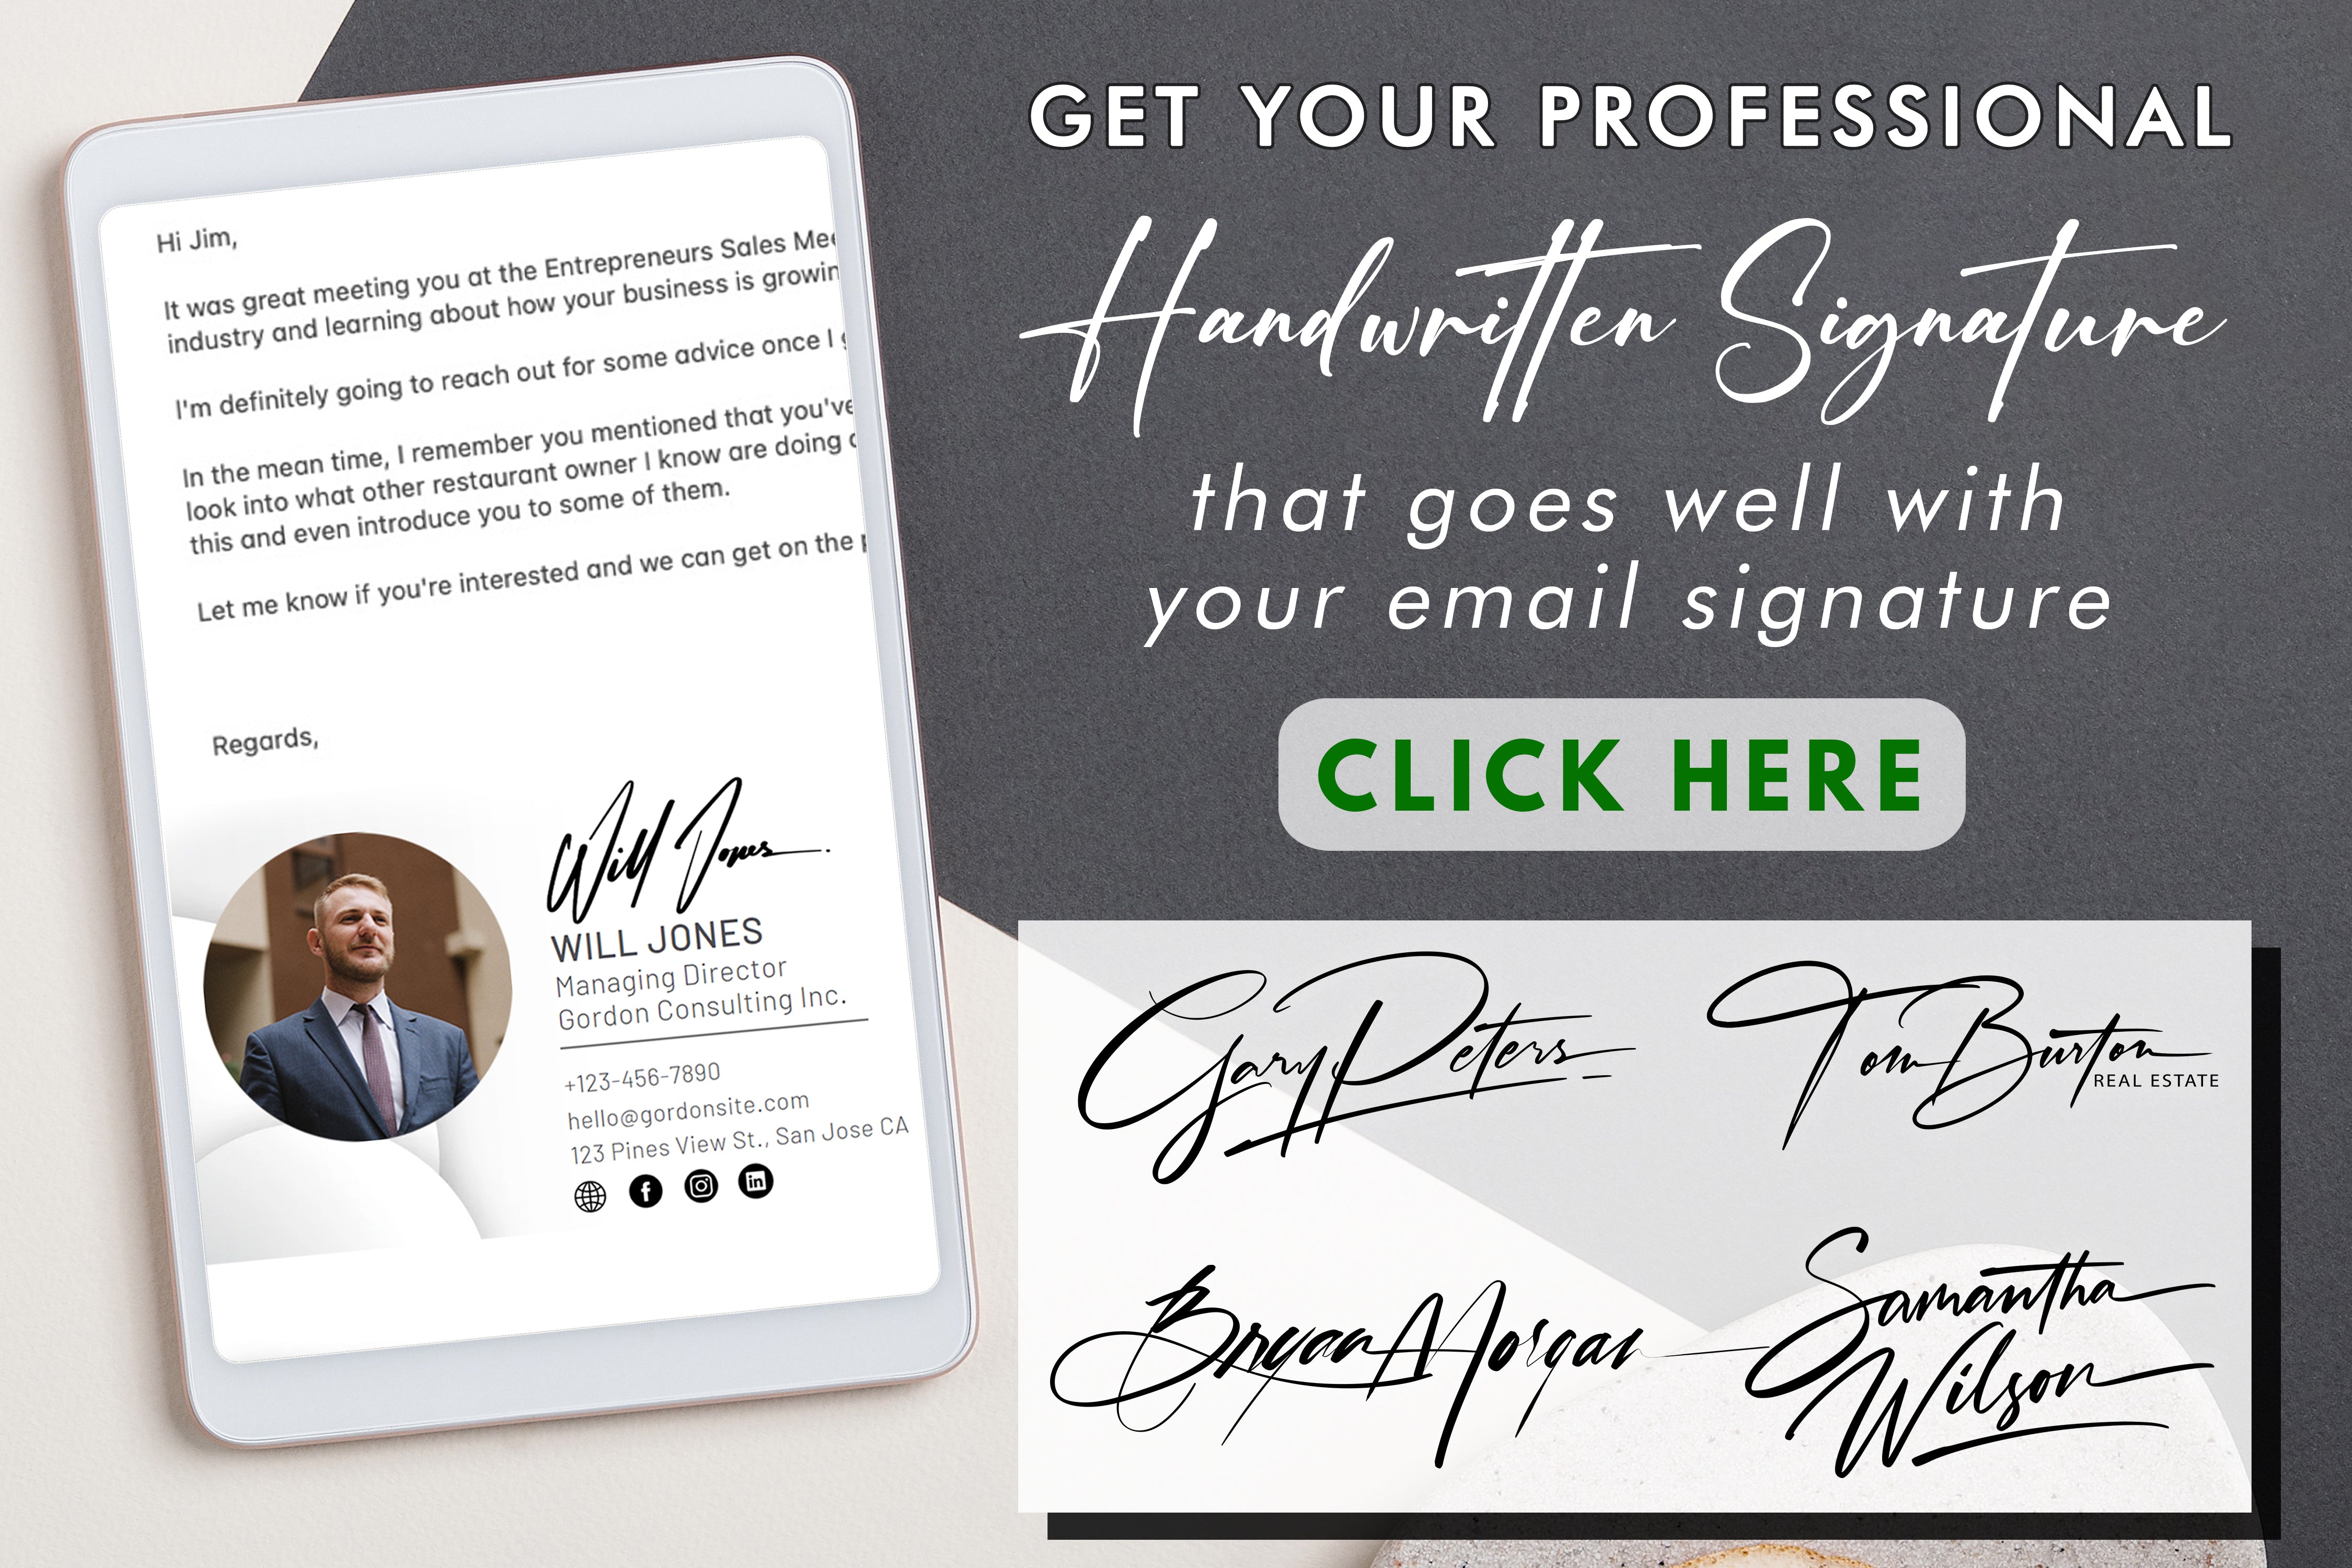 Learn how to make the most of your signature block and elevate your document signing experience with efficiency and a personal touch.